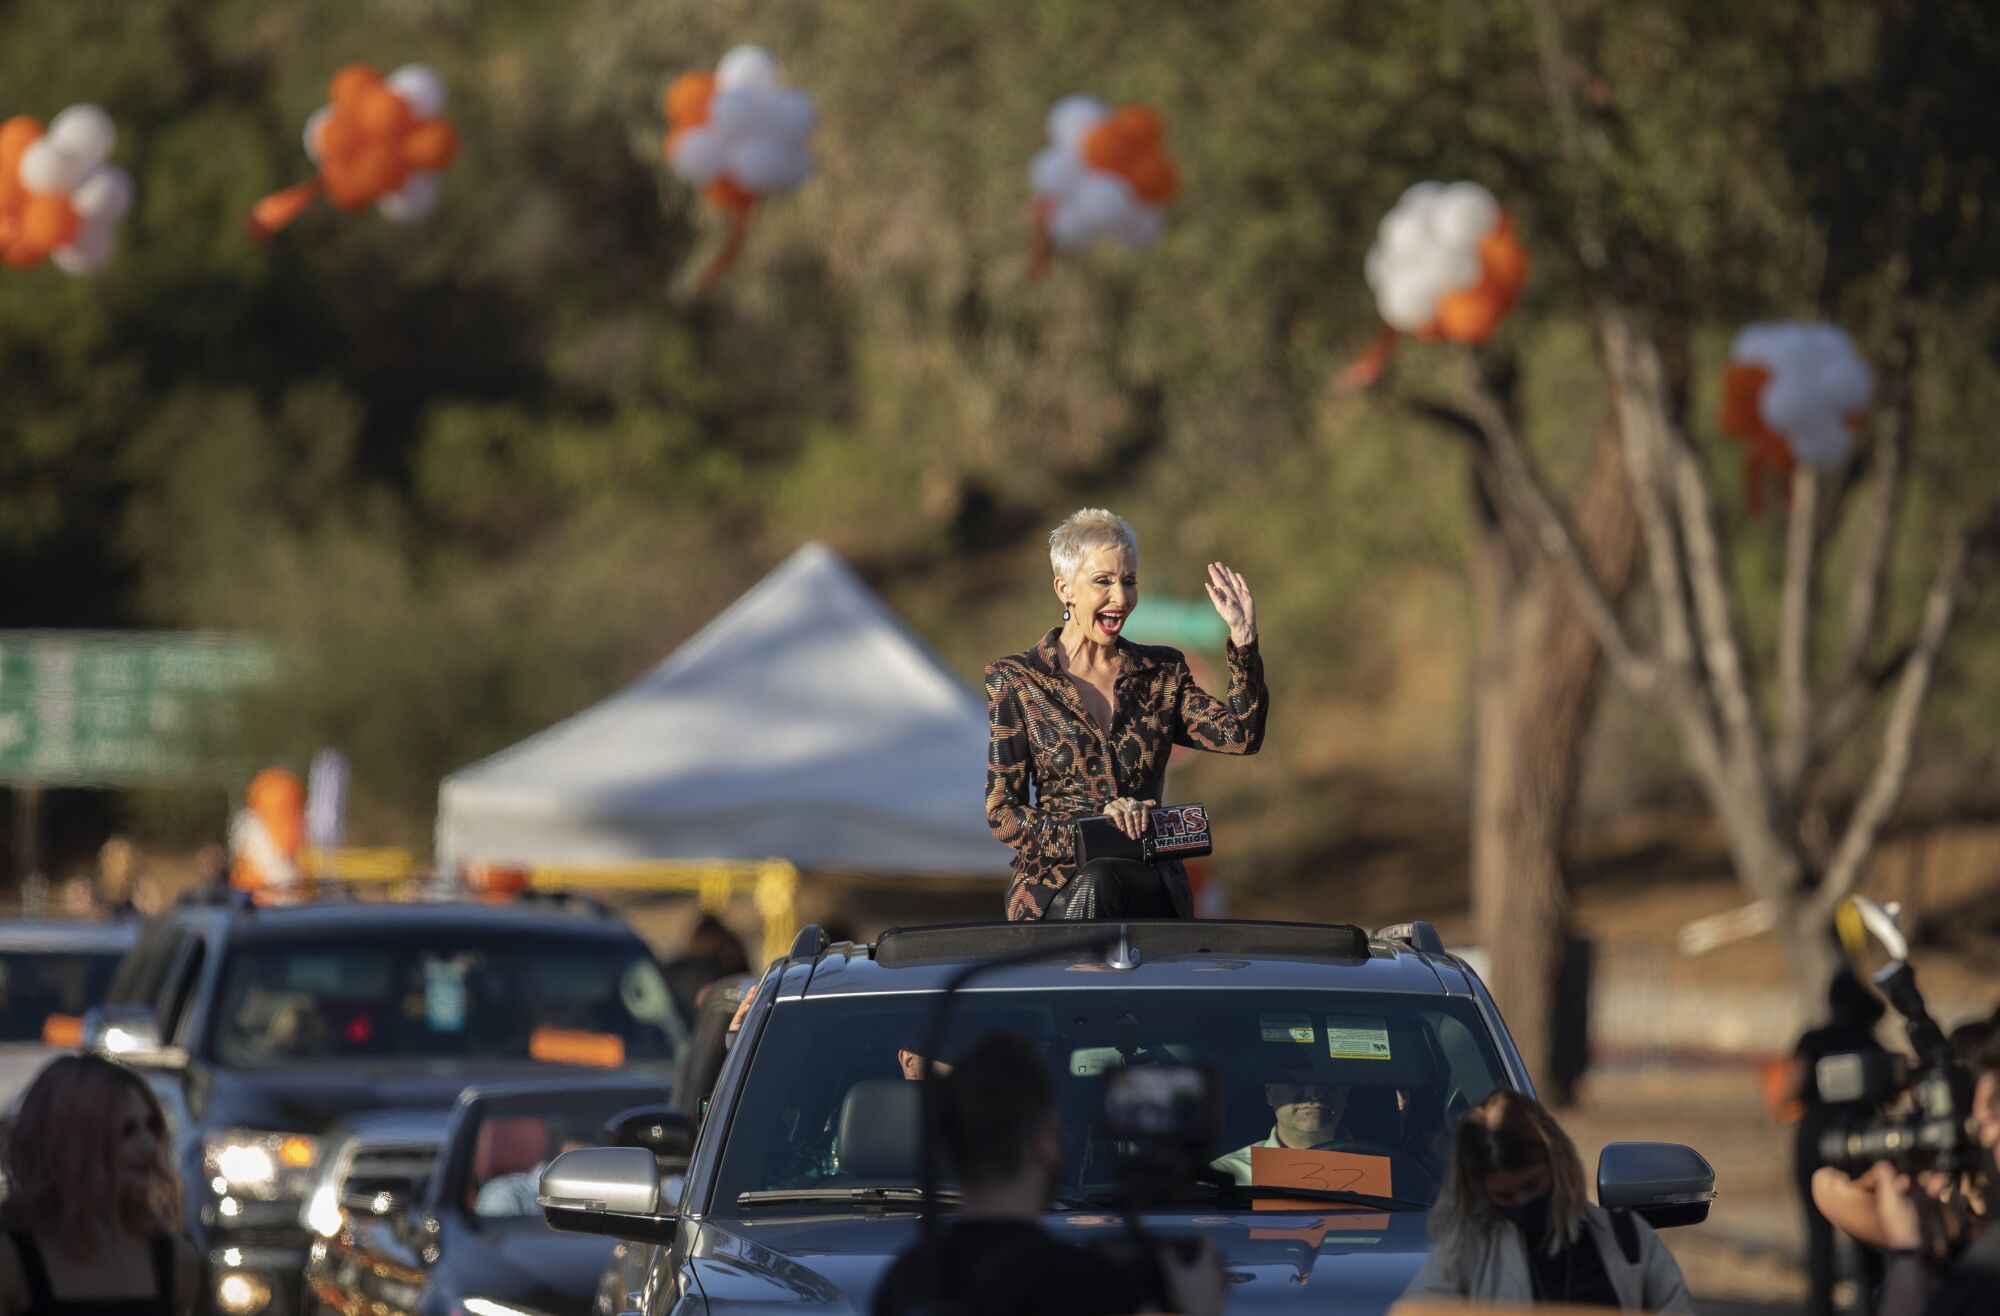 Actress Camerone Parker waves from the sunroof of a car during the arrival for the Race to Erase MS benefit at the Rose Bowl.